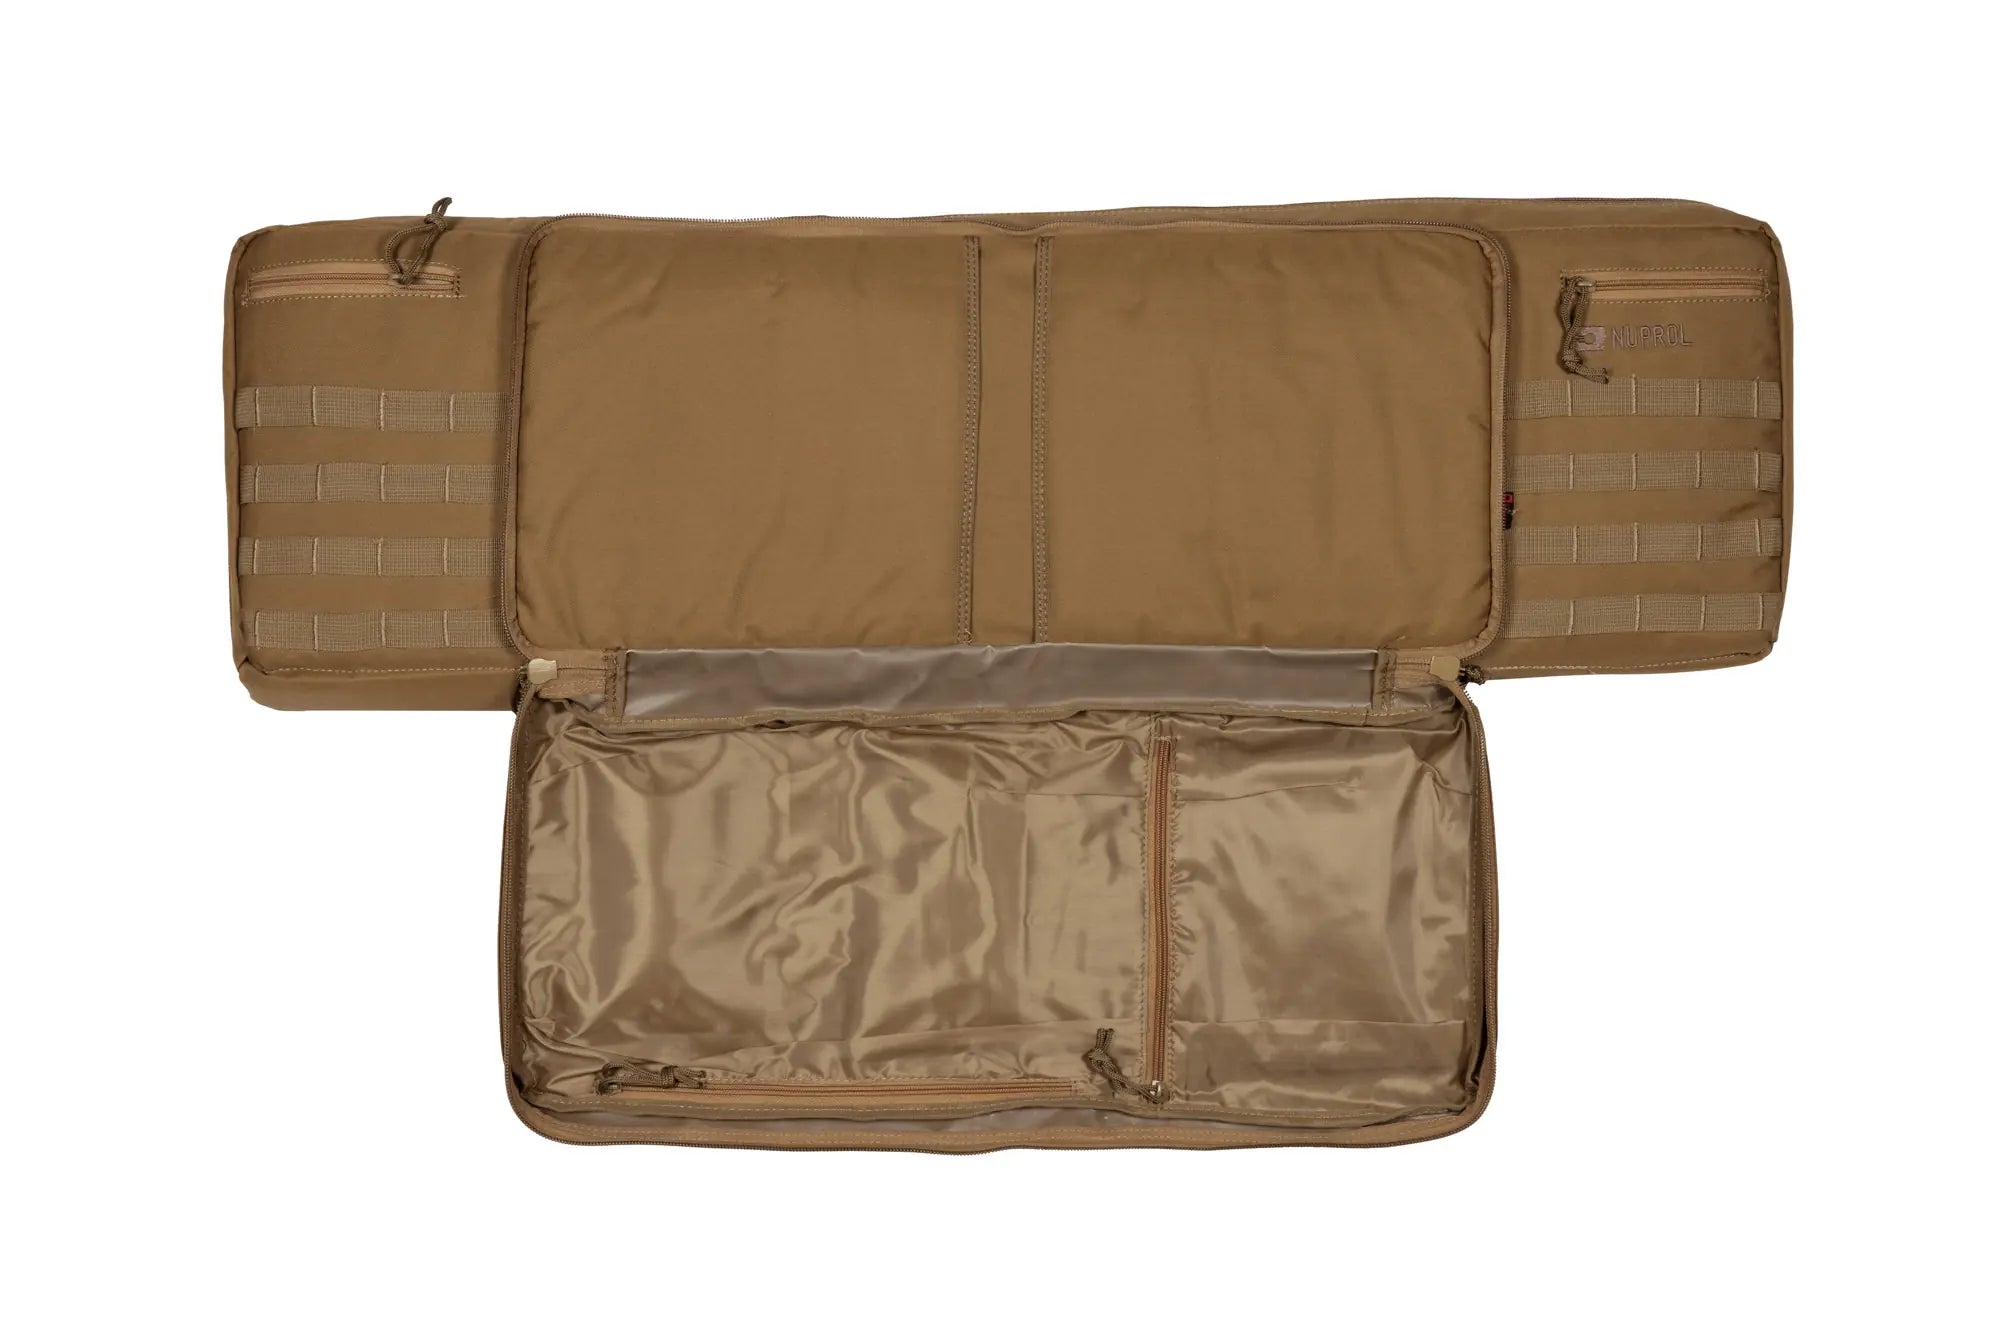 NP PMC Deluxe Soft Double Rifle Bag 42 - Tan"-6